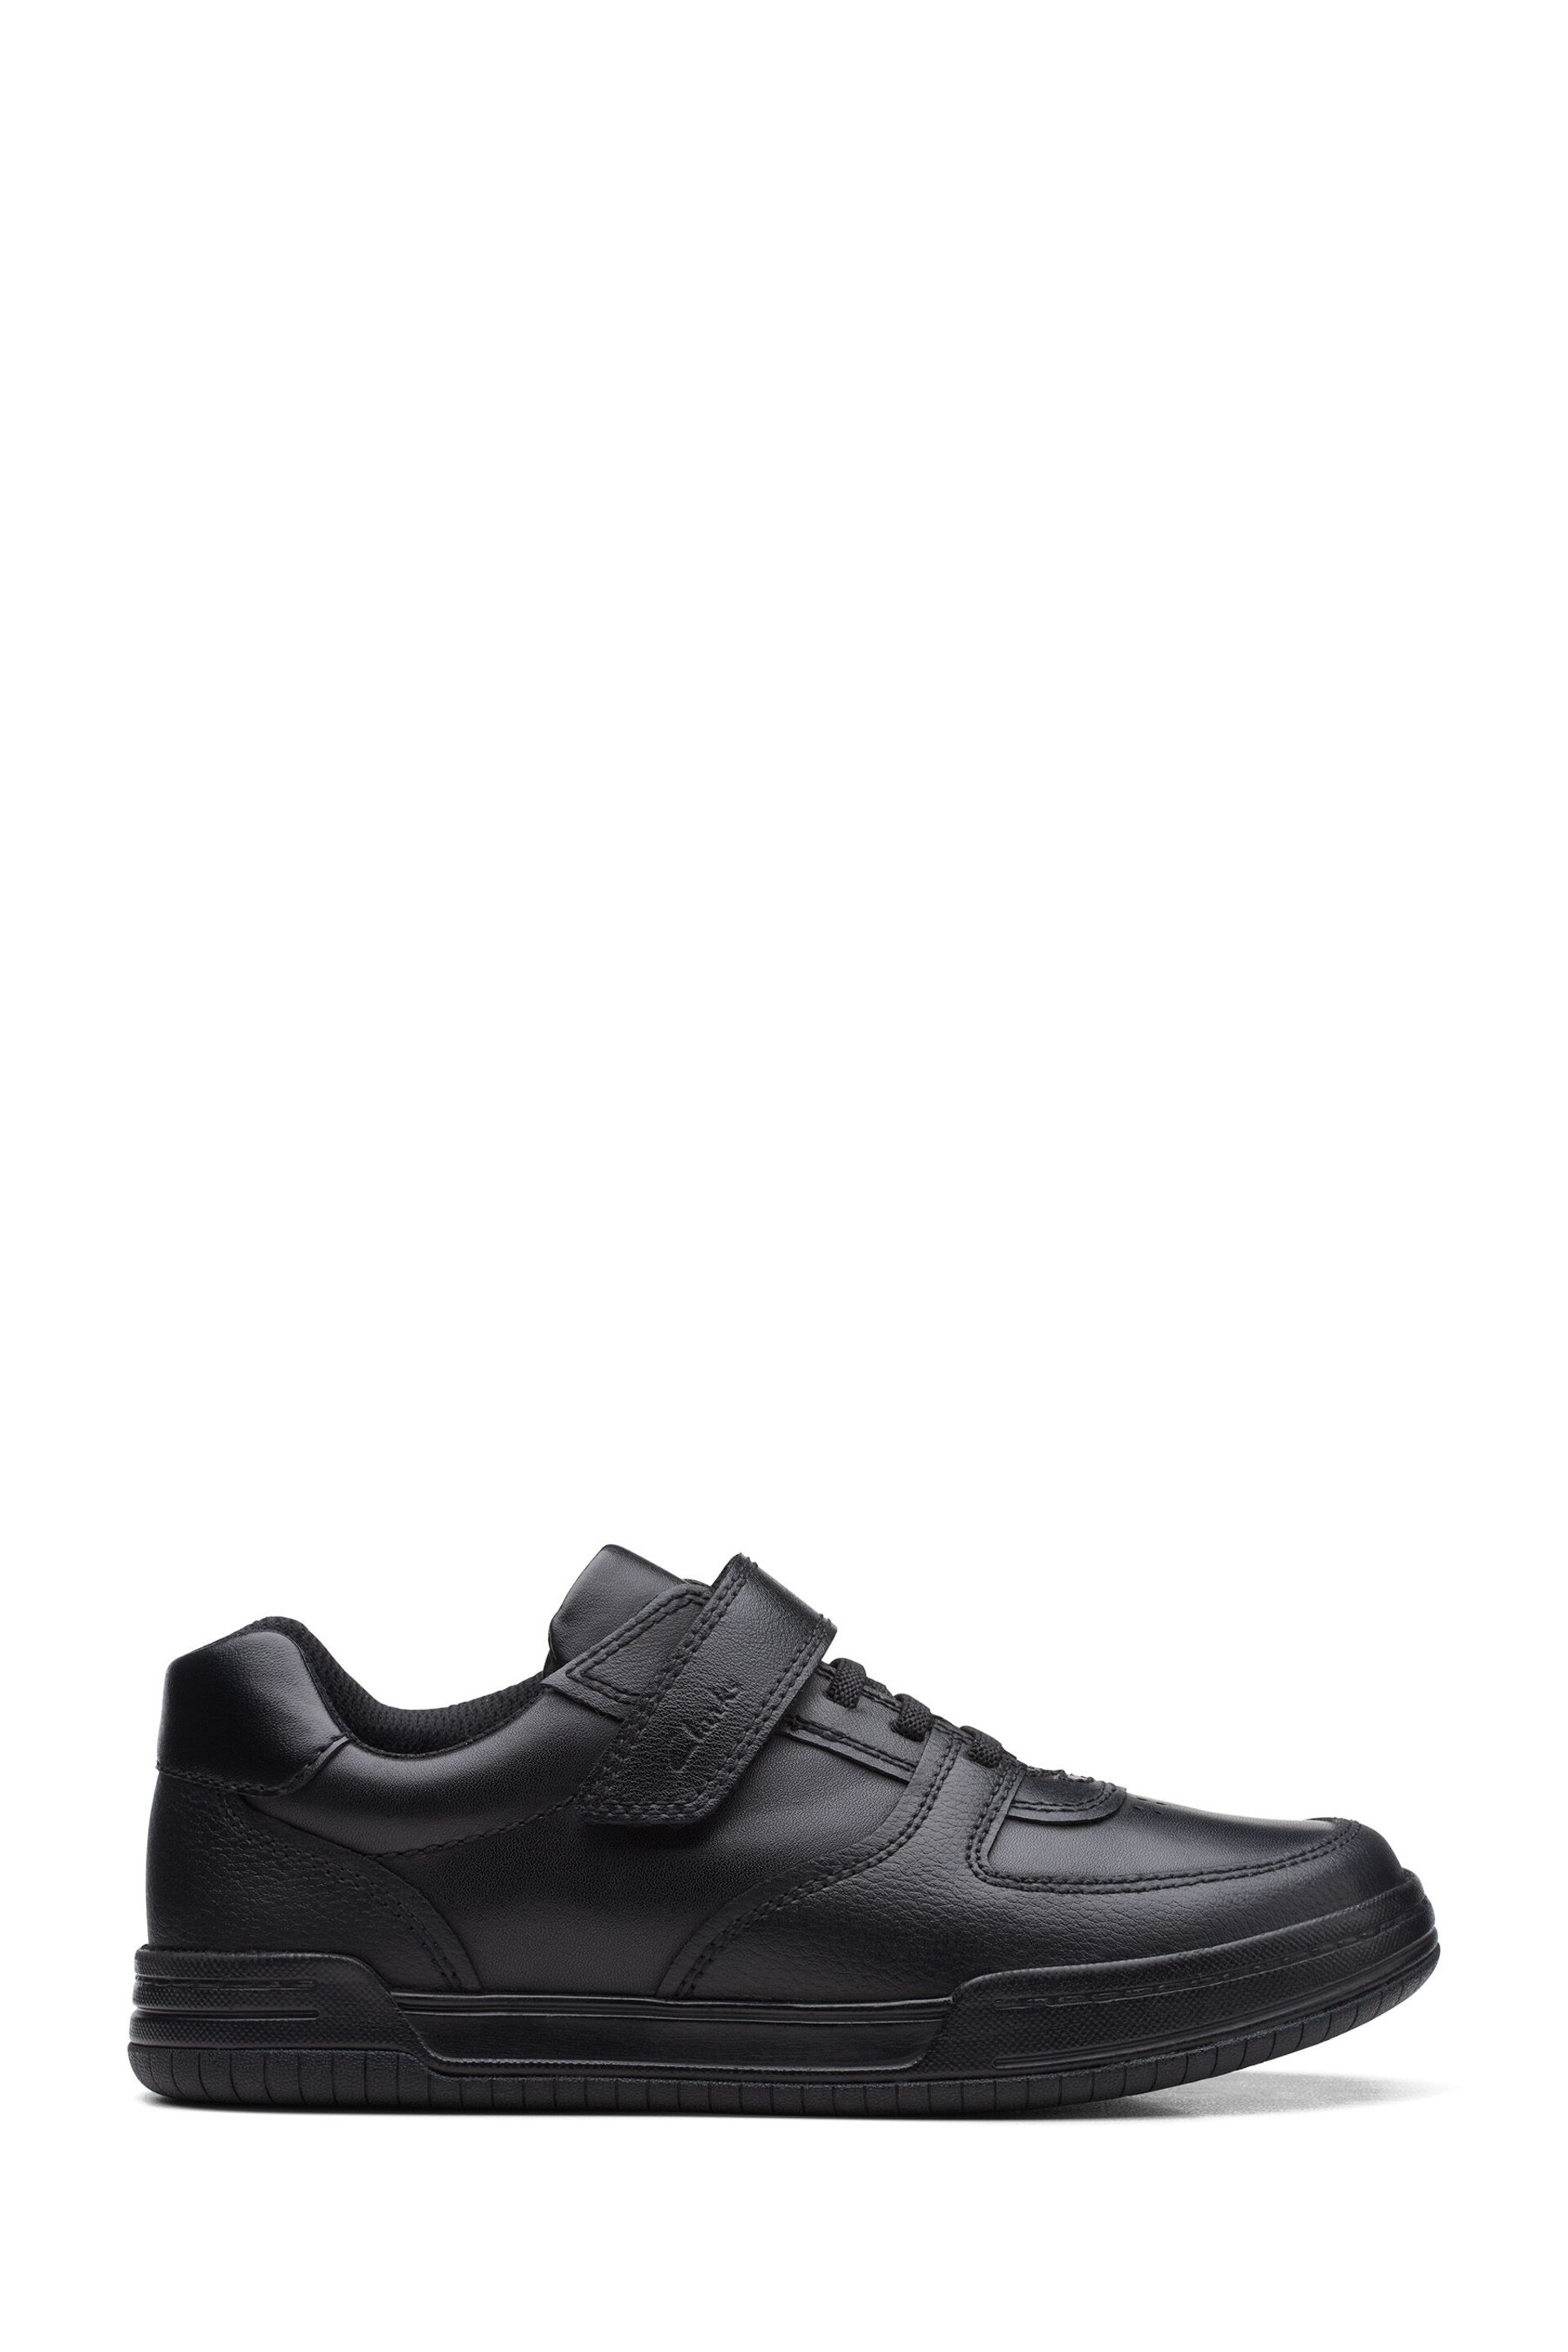 Clarks Black Multi Fit Leather Fawn Lay Shoes - Image 1 of 7